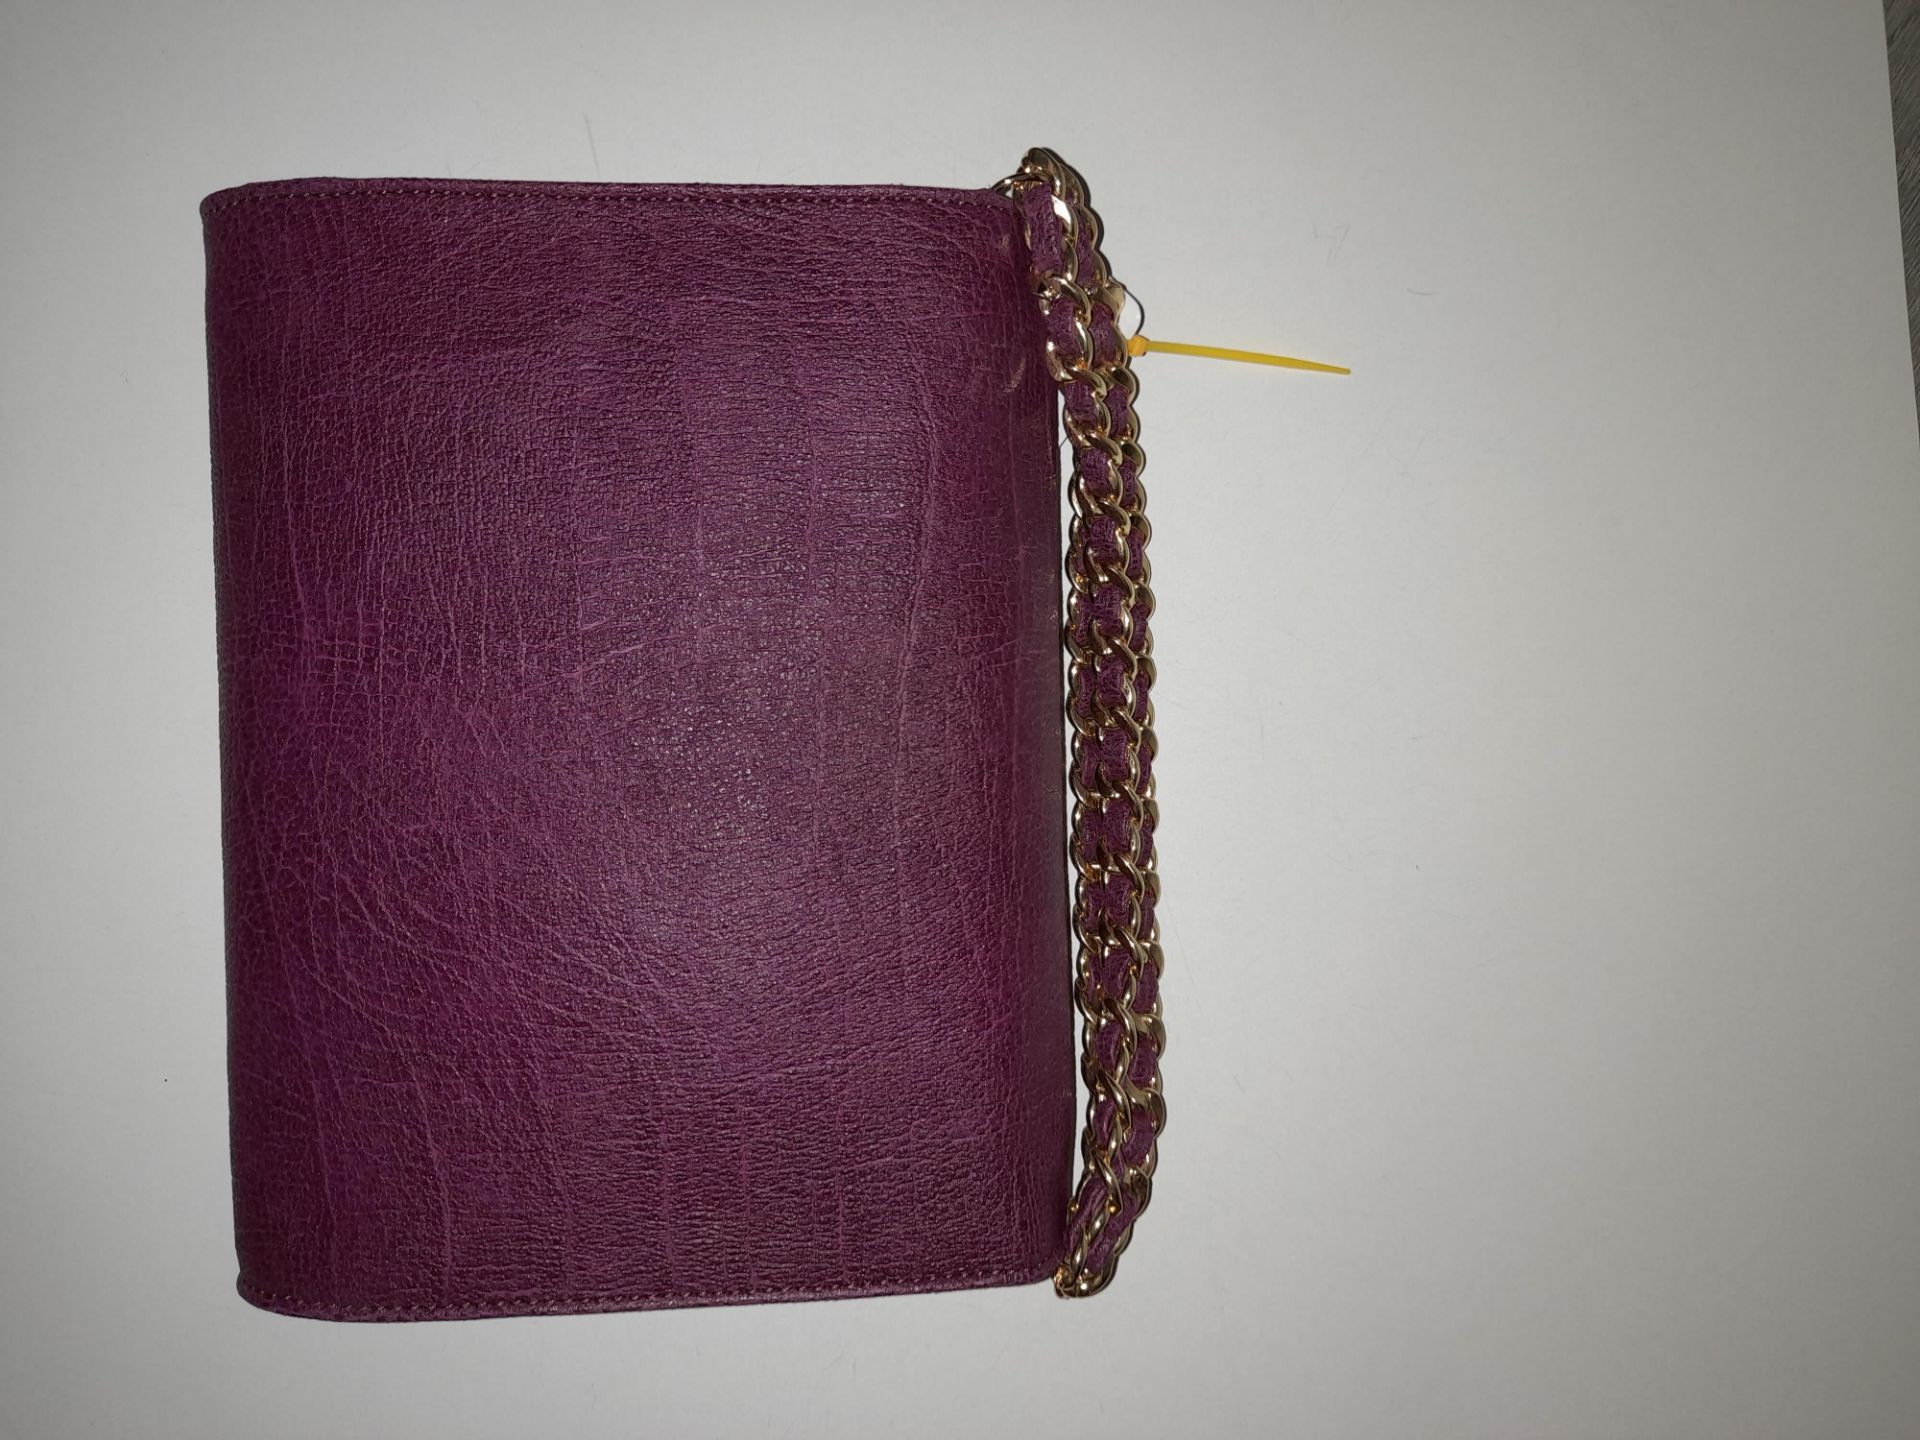 Maviya “Mannie” Purple Vegan Italian Leather Evening Clutch Bag with Grained Finish, Faux Suede - Image 2 of 3